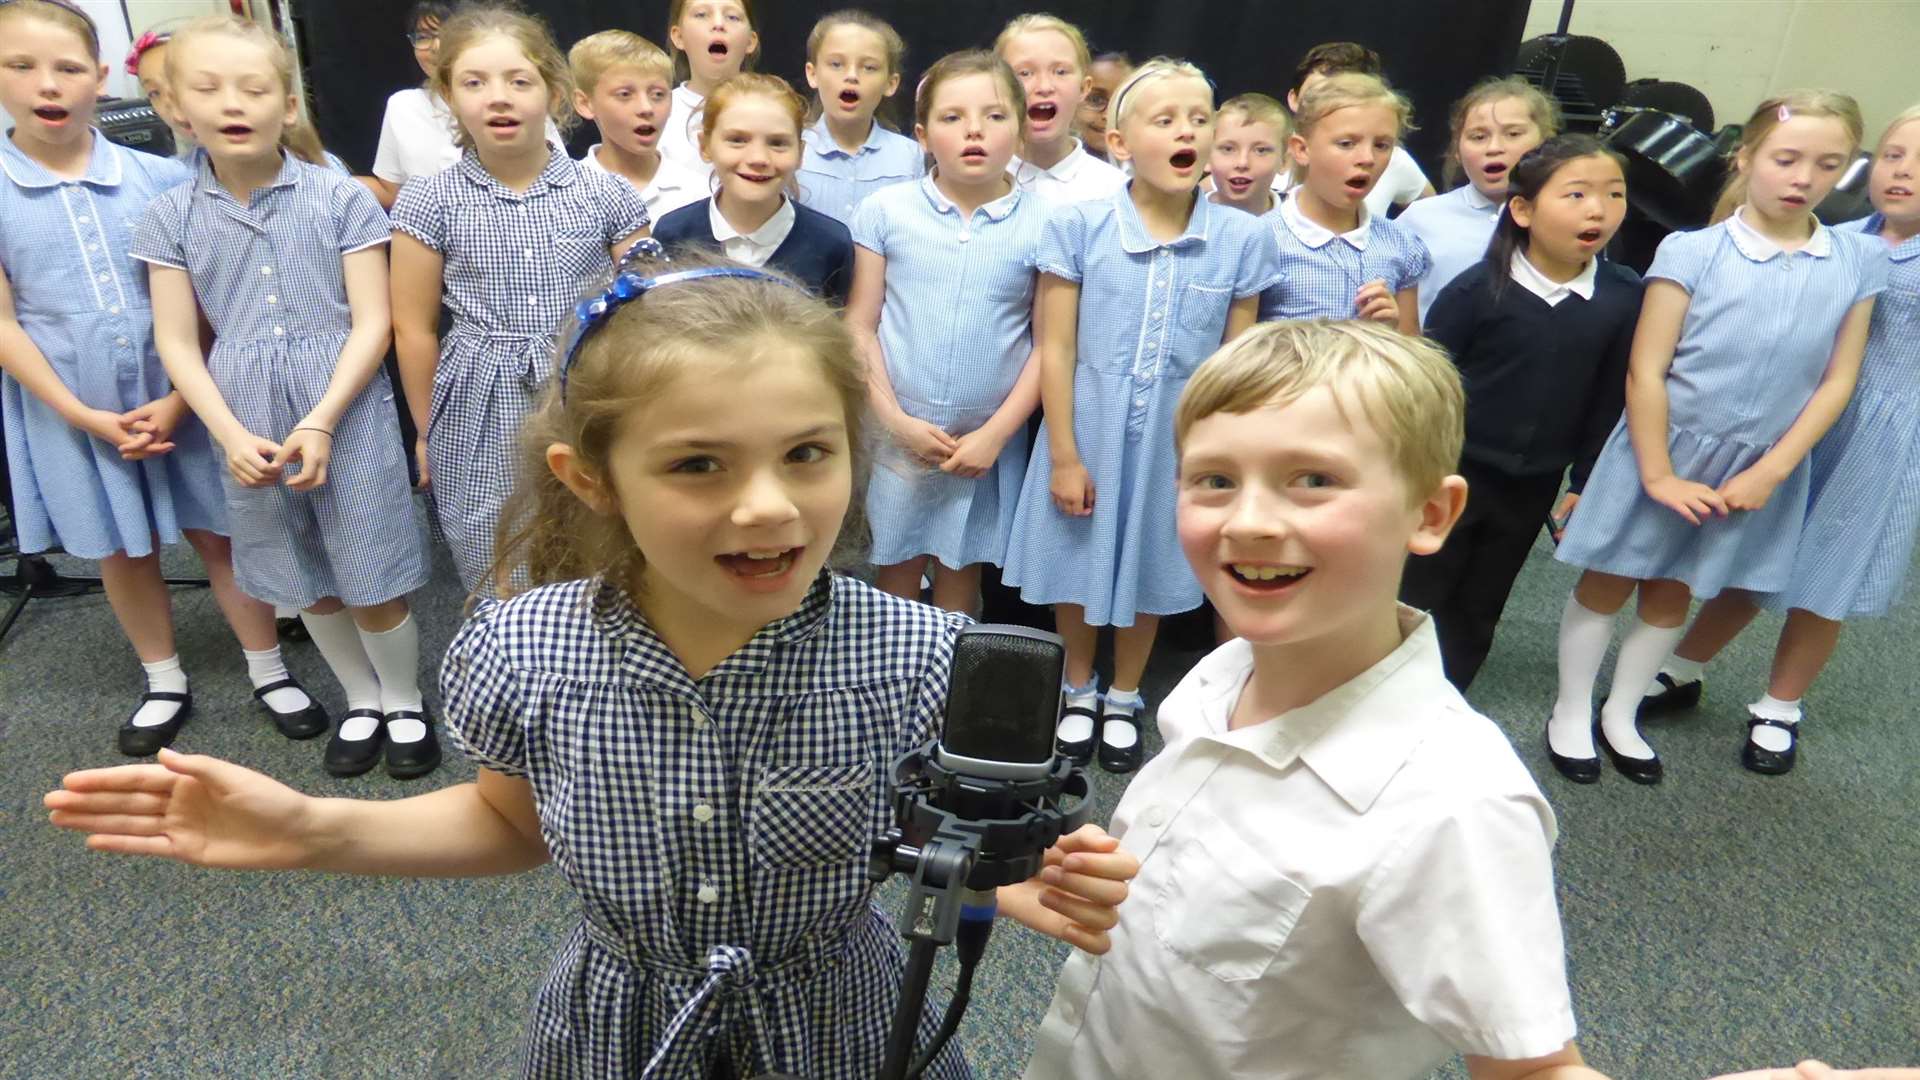 Wincheap Primary School, Canterbury were crowned champions of last year's KM Walk to School Song Contest.